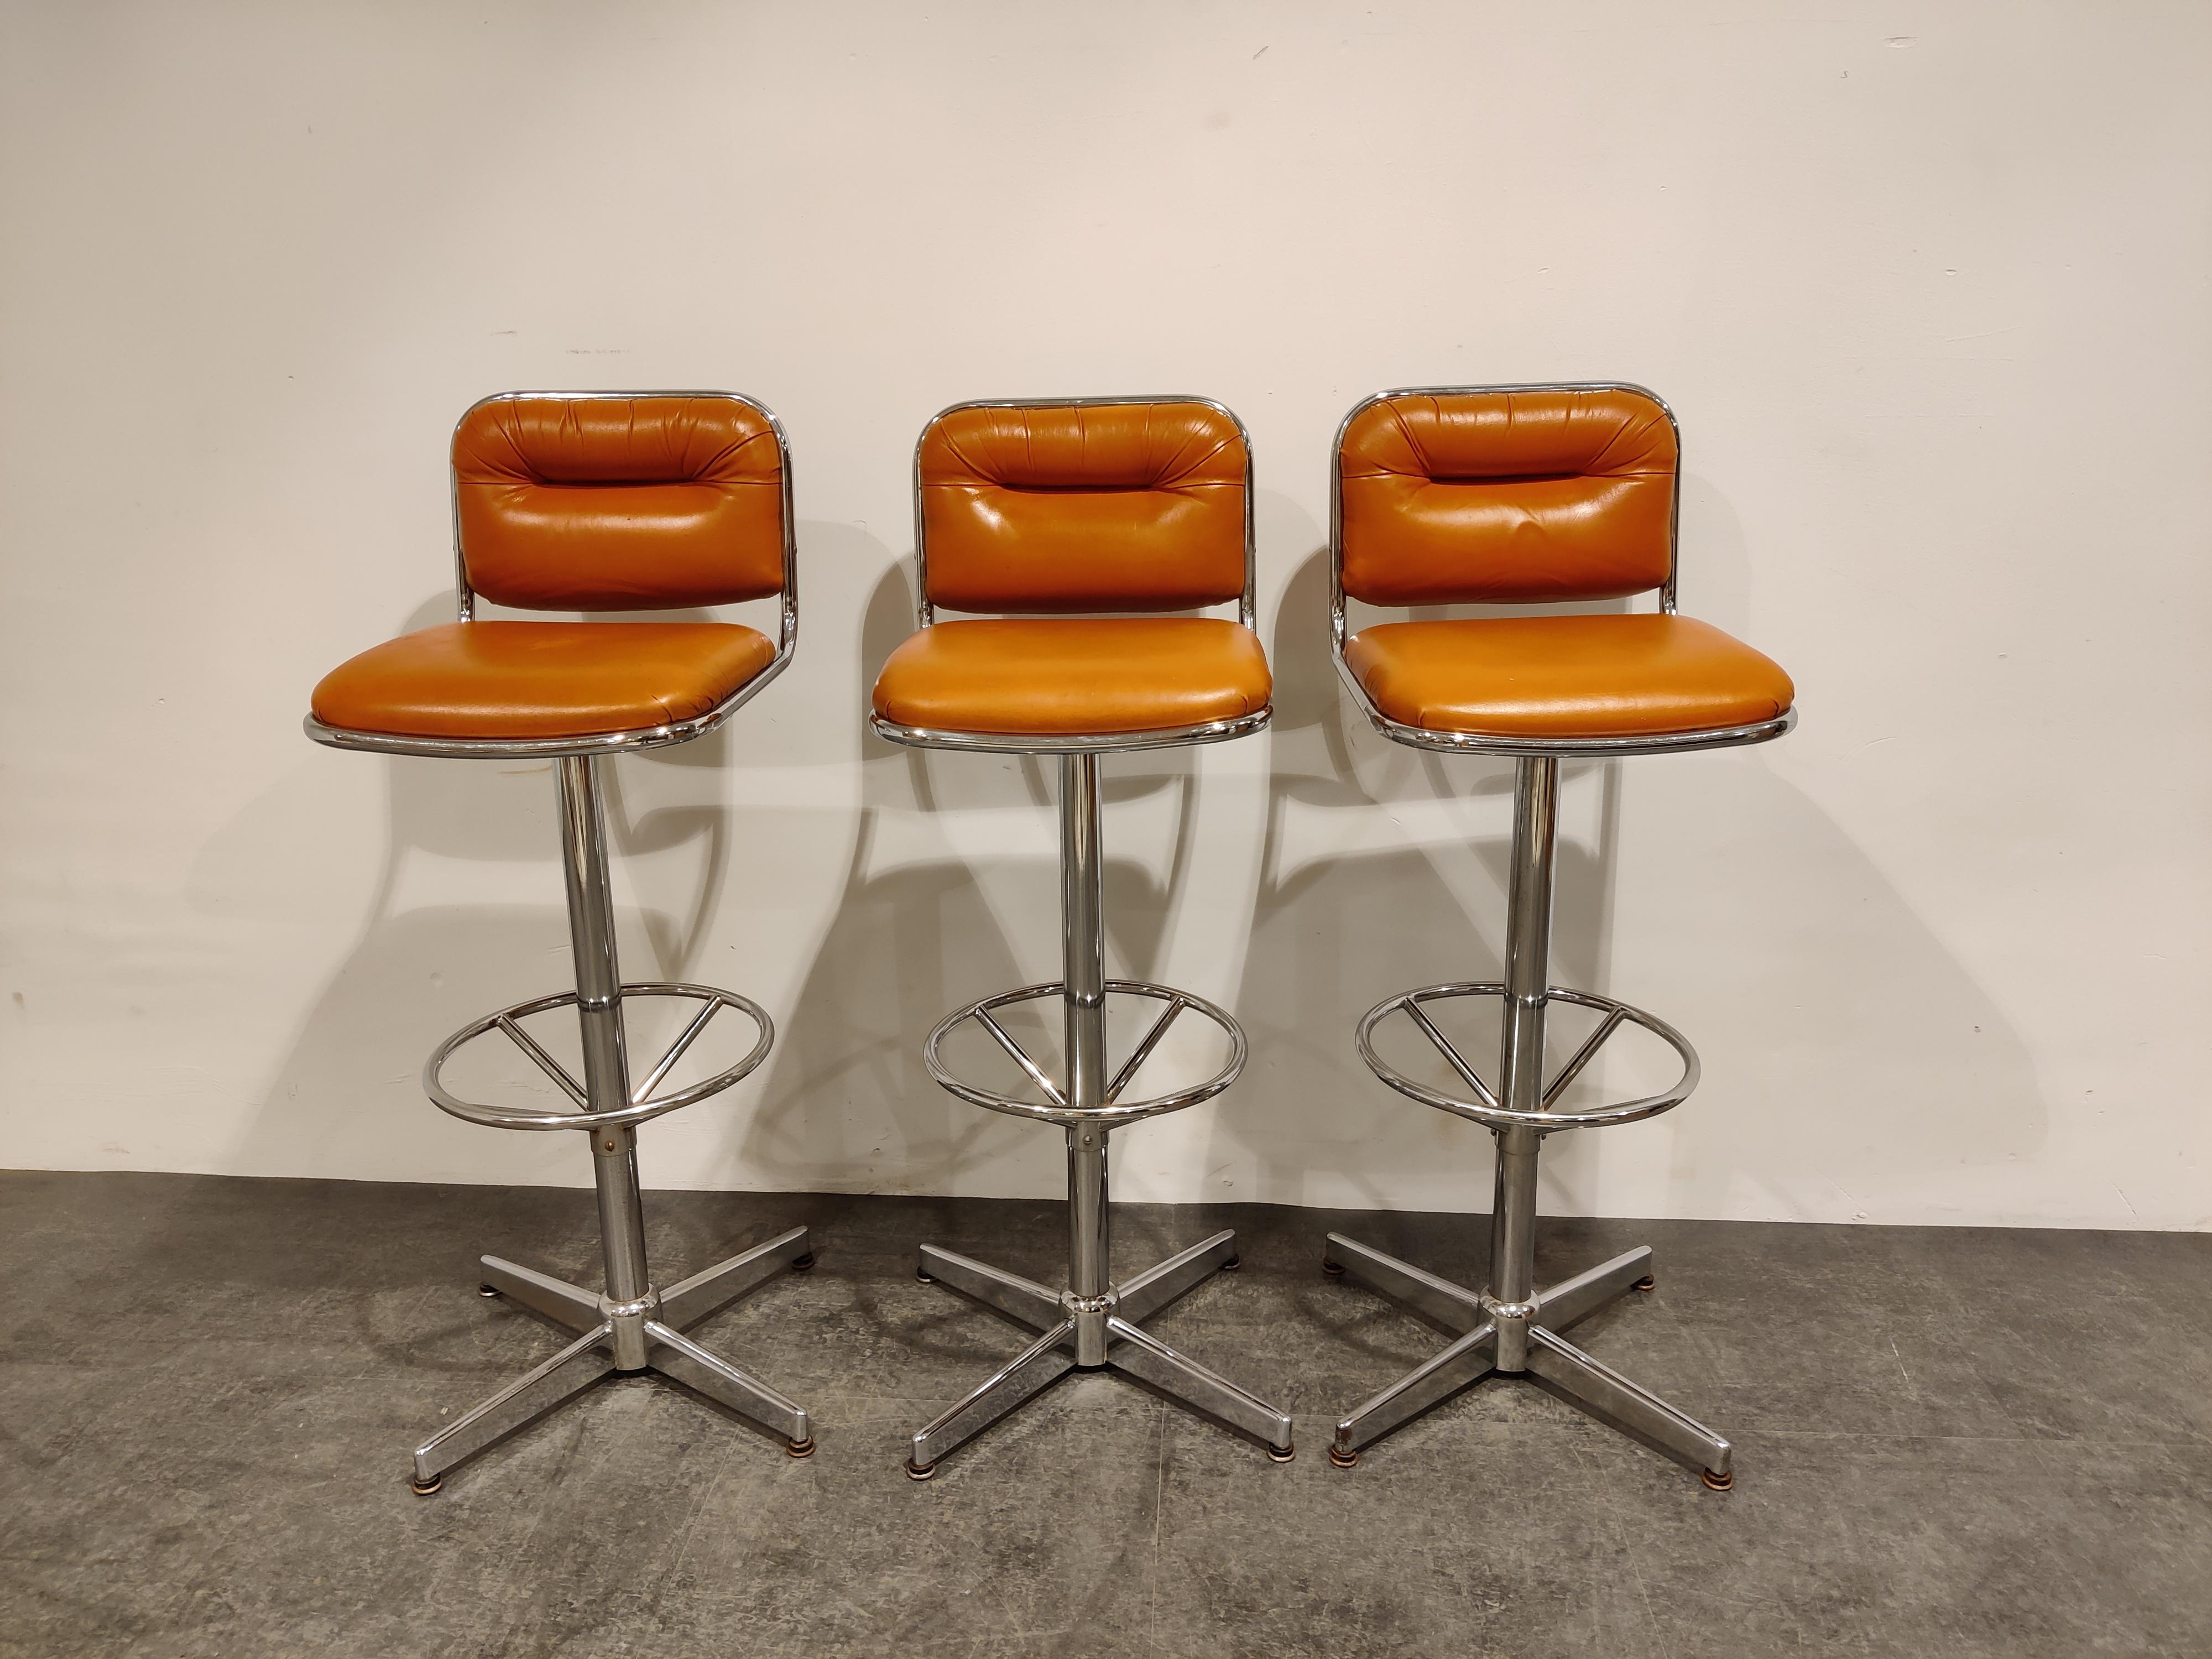 Vintage Space Age era bar stools with chromed metal bases and orange skai (faux leather) upholstery.

Good condition

1970s - Belgium

Dimensions:
Height: 111cm/43.70